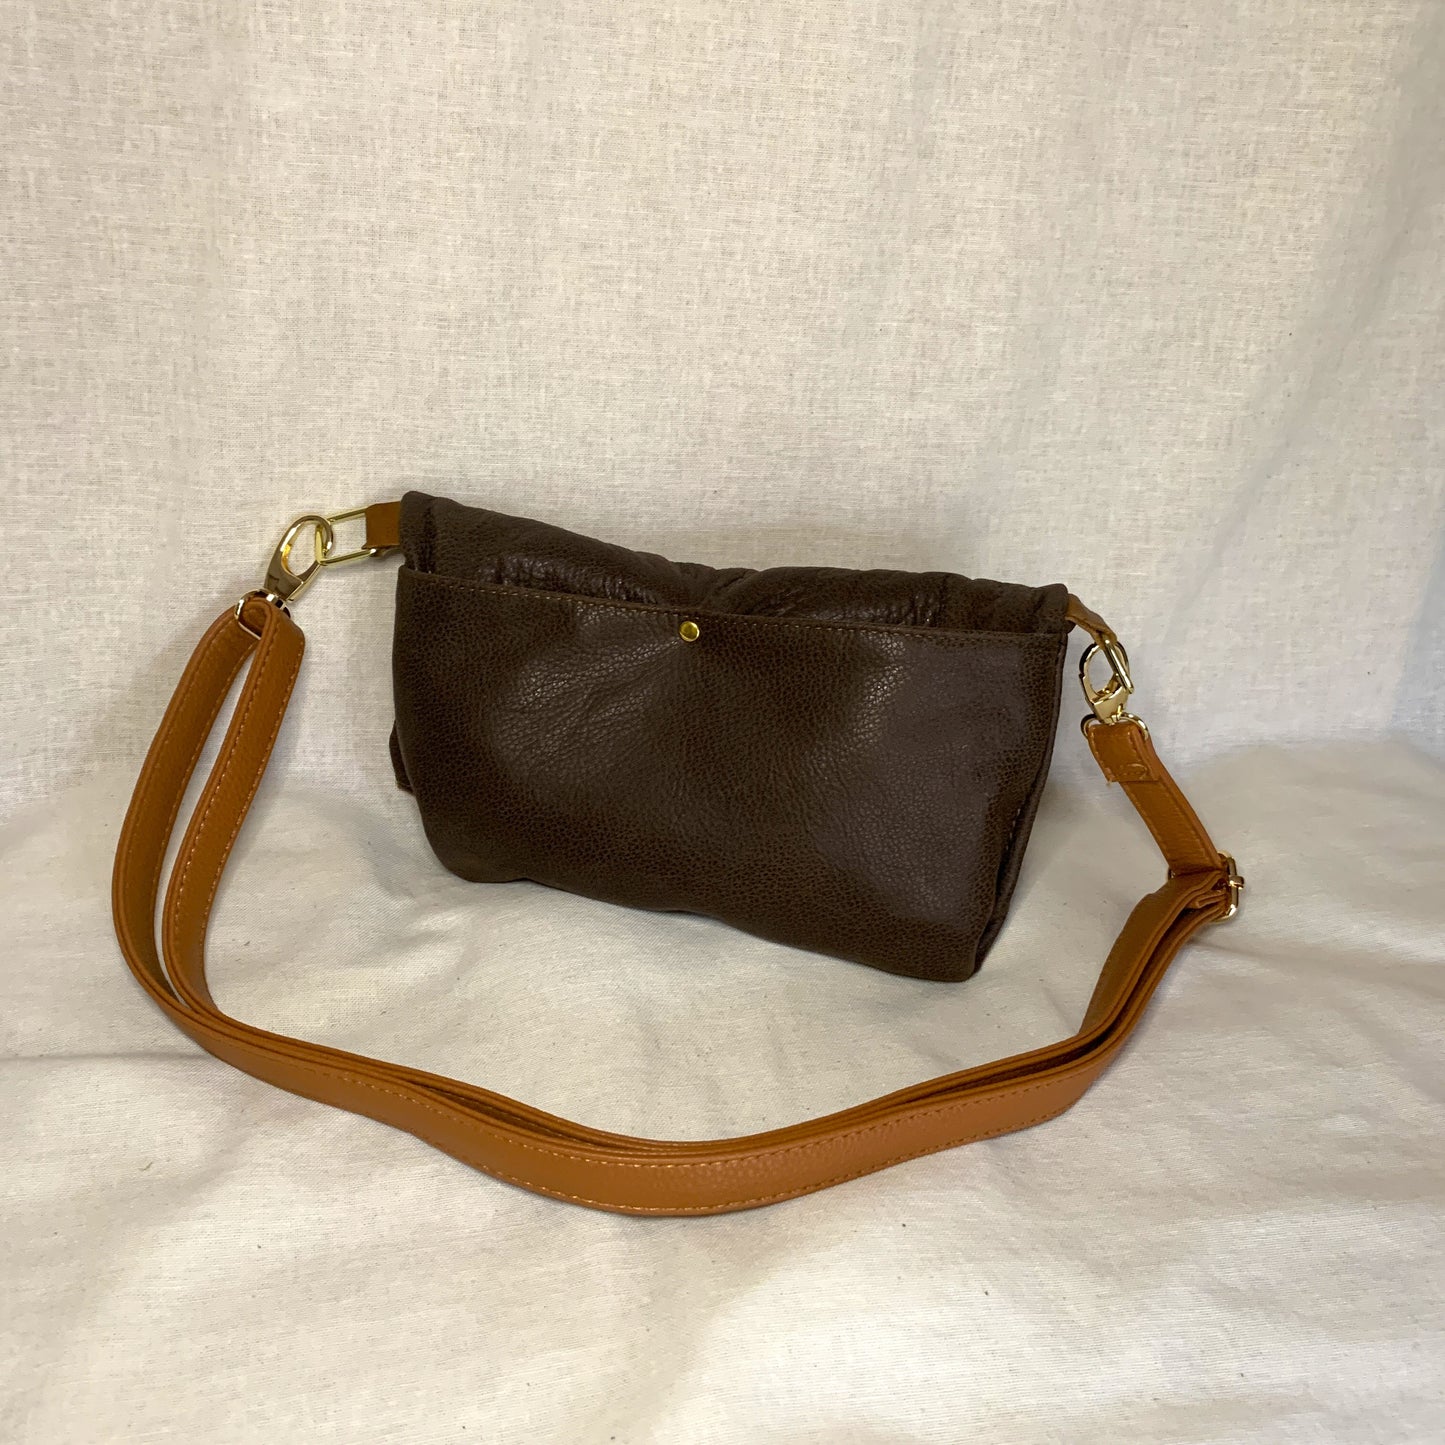 All leather small fold over crossbody  bag with two external pockets and interior zip pockett.